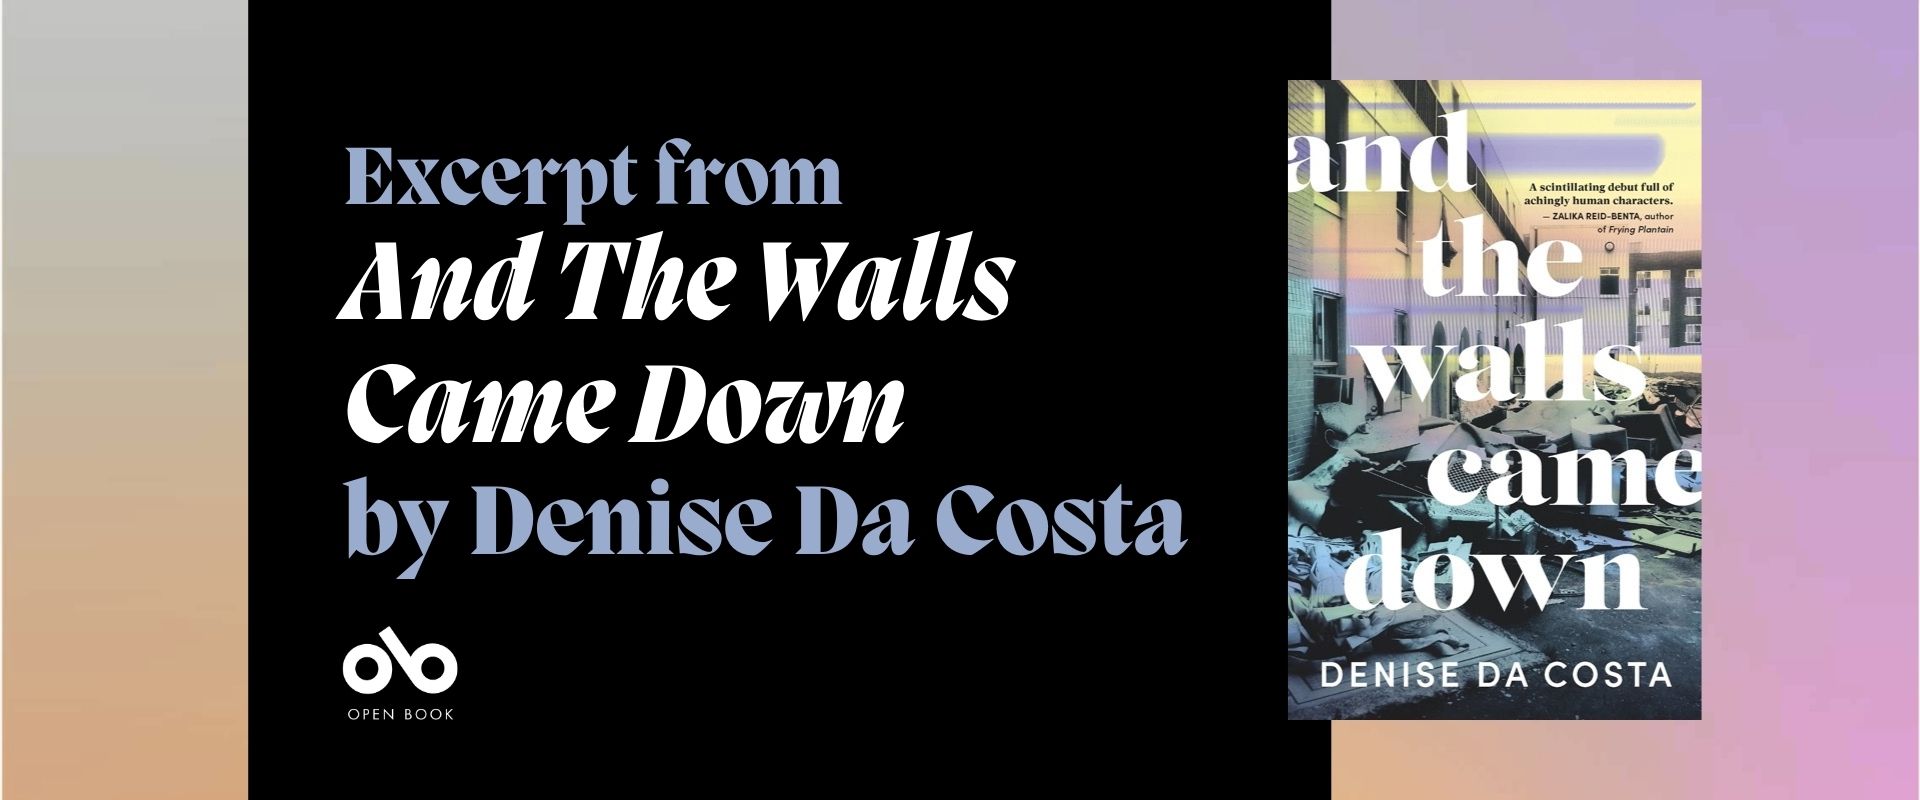 multi-coloured banner image with black foreground and text reading "Excerpt from  And The Walls Came Down by Denise Da Costa". Image of the cover of And The Walls Came Down by Denise Da Costa on the right and Open Book logo on the bottom left